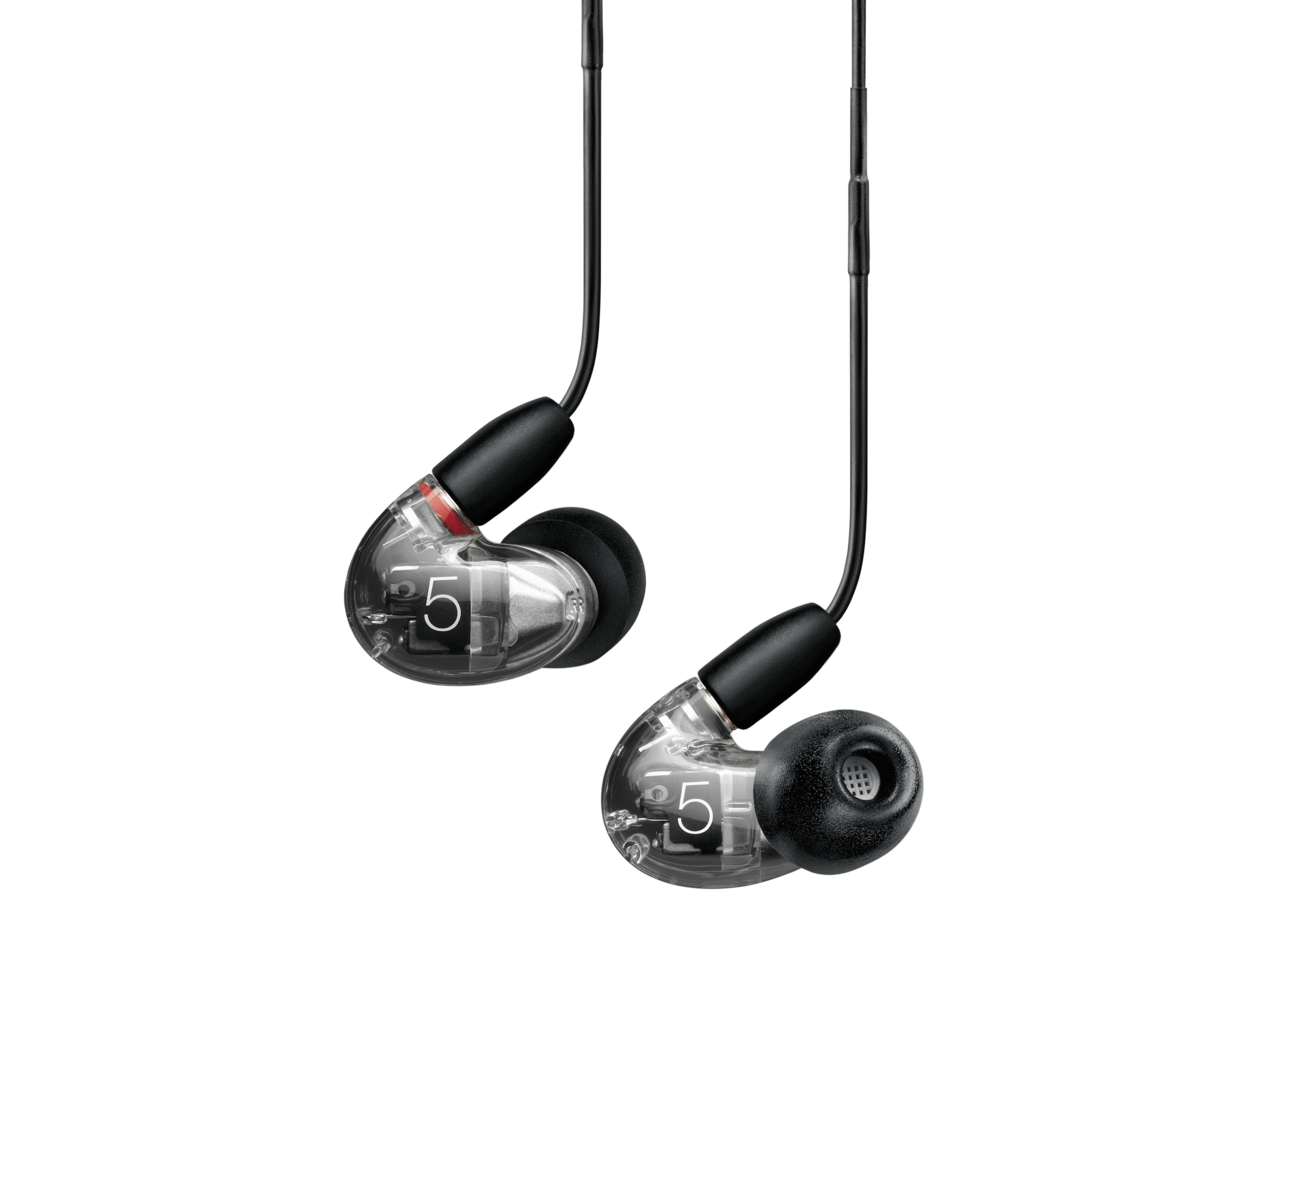 Shure Aonic 5 - Professional In-Ear Monitor Earphones with Remote Control and Microphone